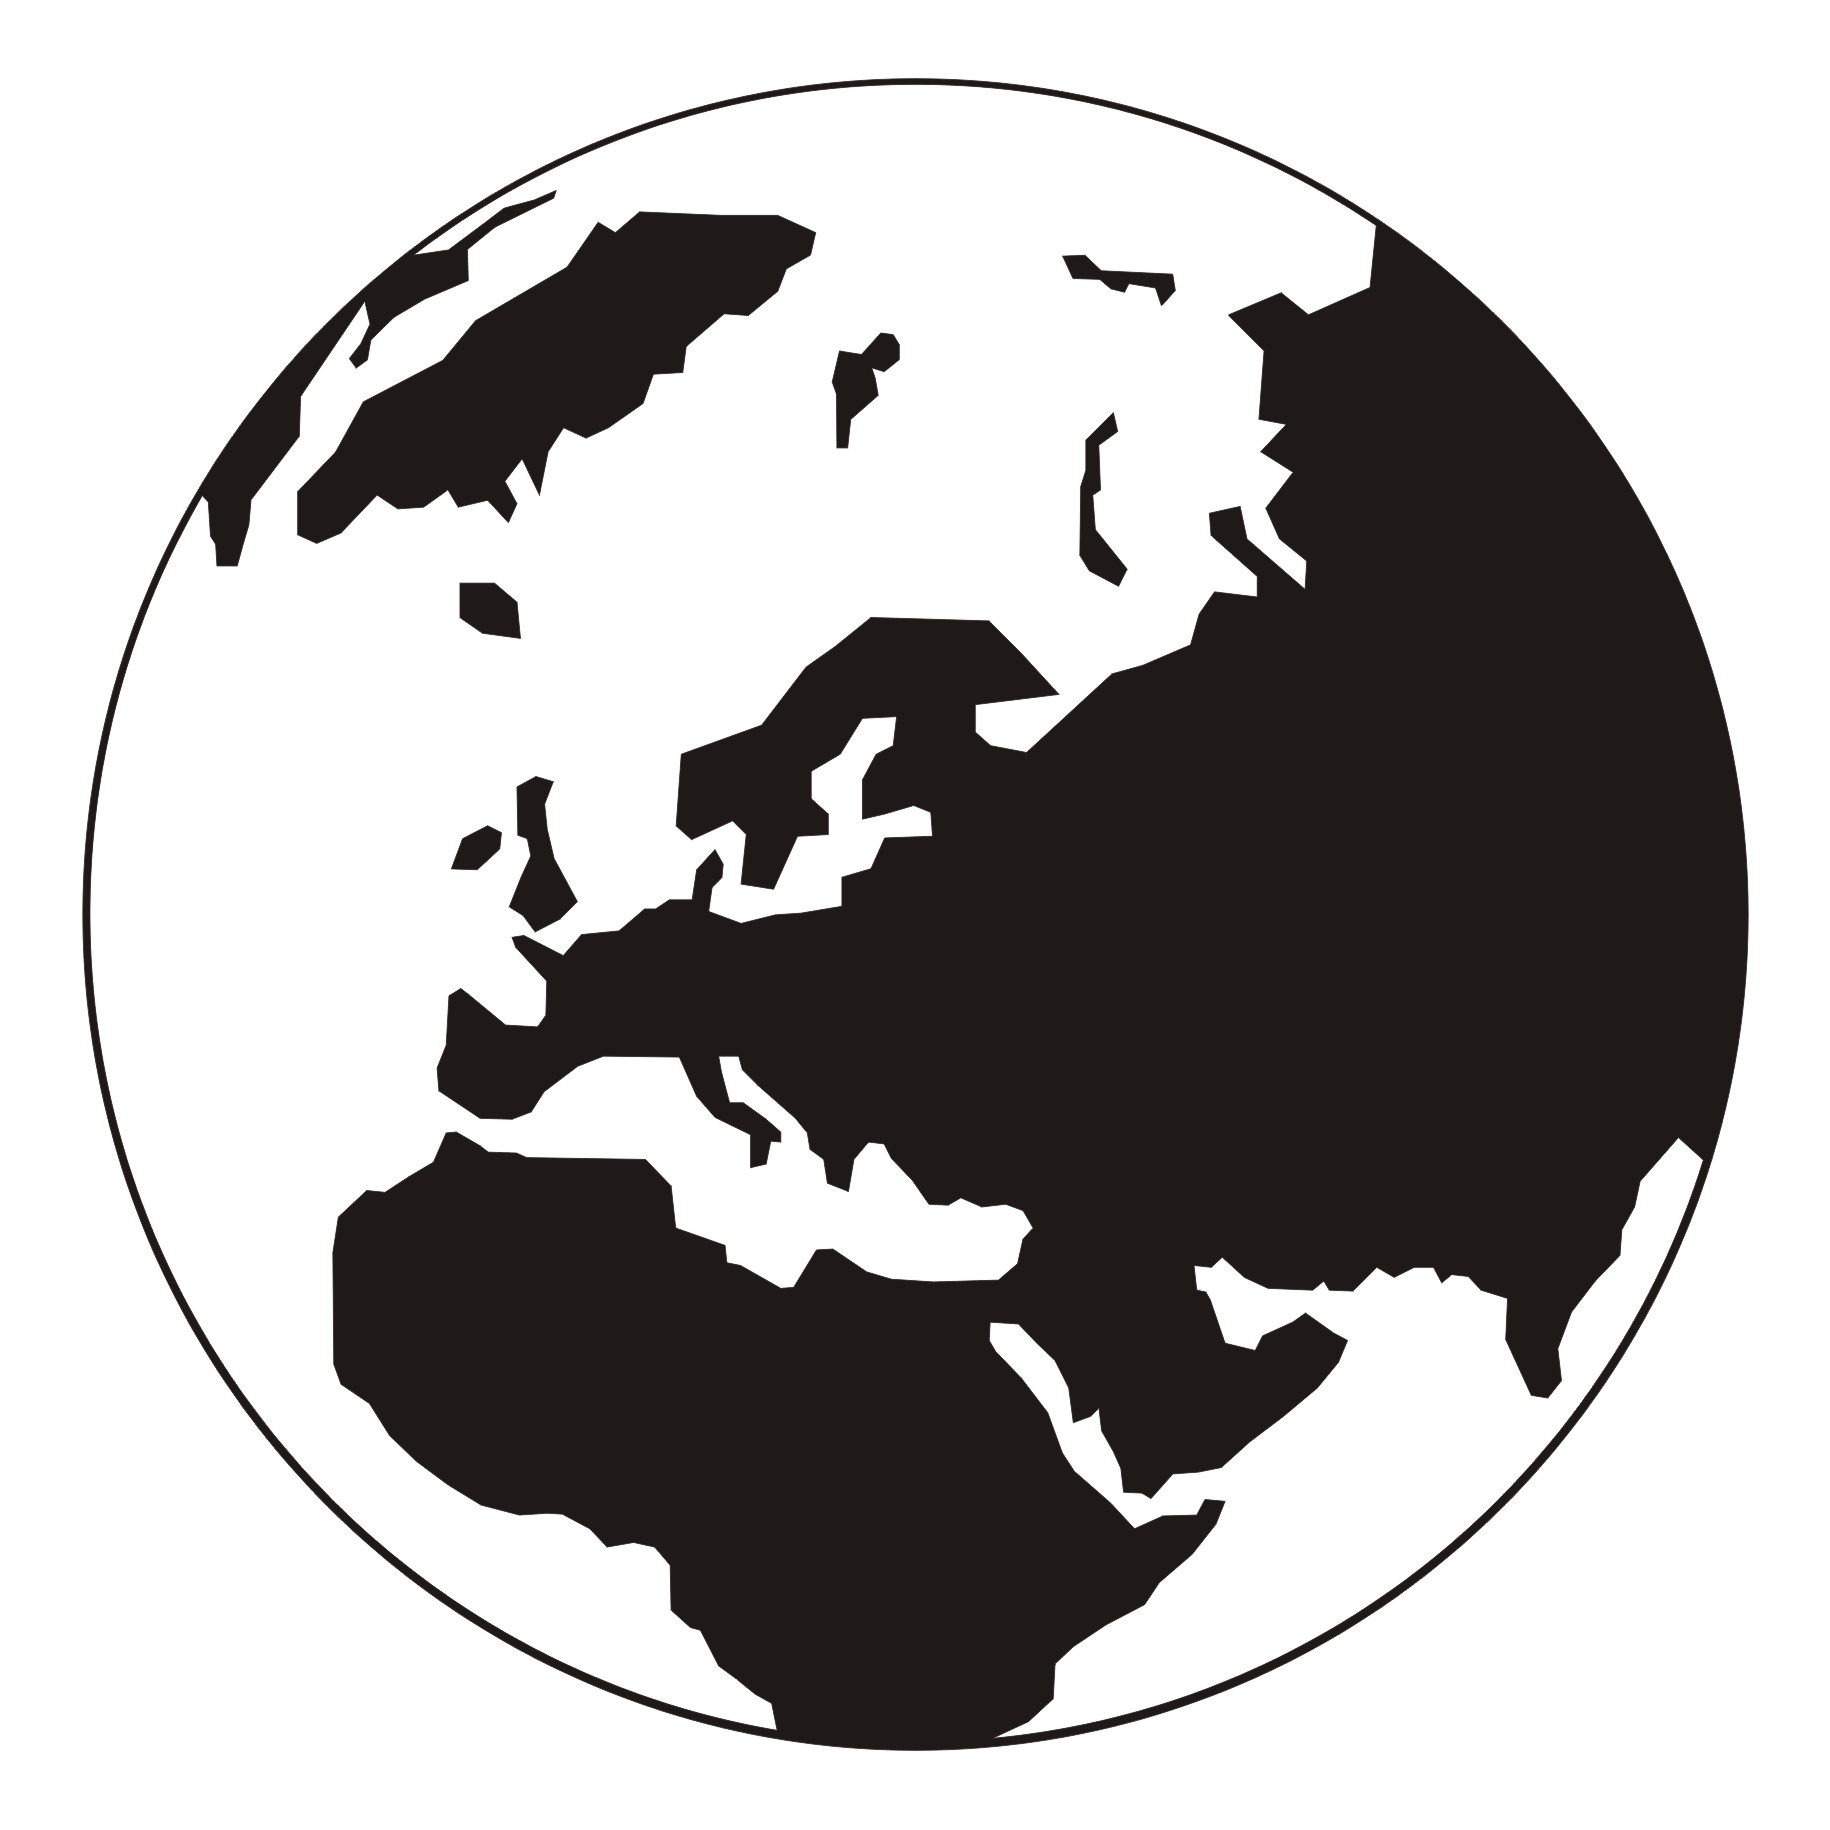 Free Globe Silhouette Png, Download Free Clip Art, Free Clip